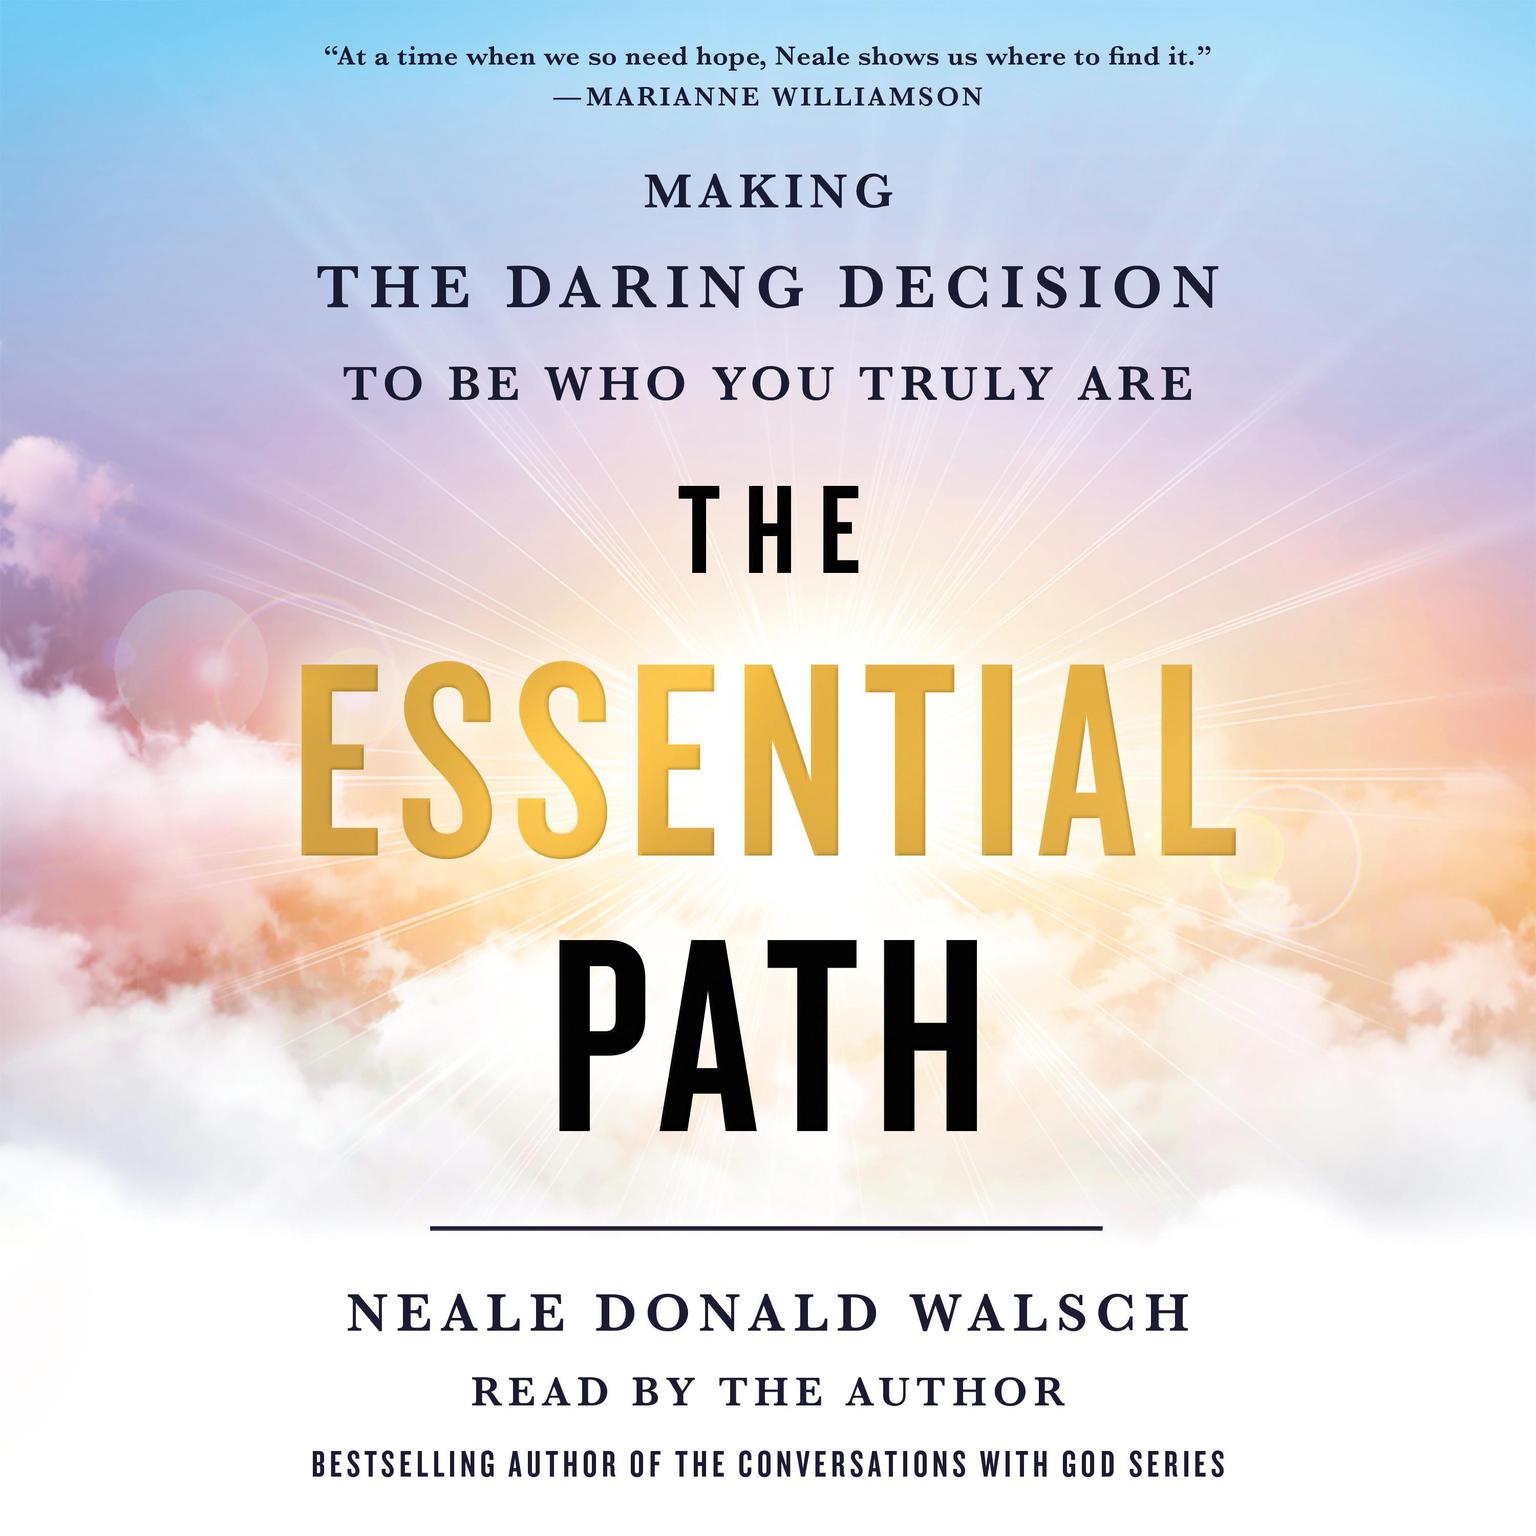 The Essential Path: Making the Daring Decision to Be Who You Truly Are Audiobook, by Neale Donald Walsch